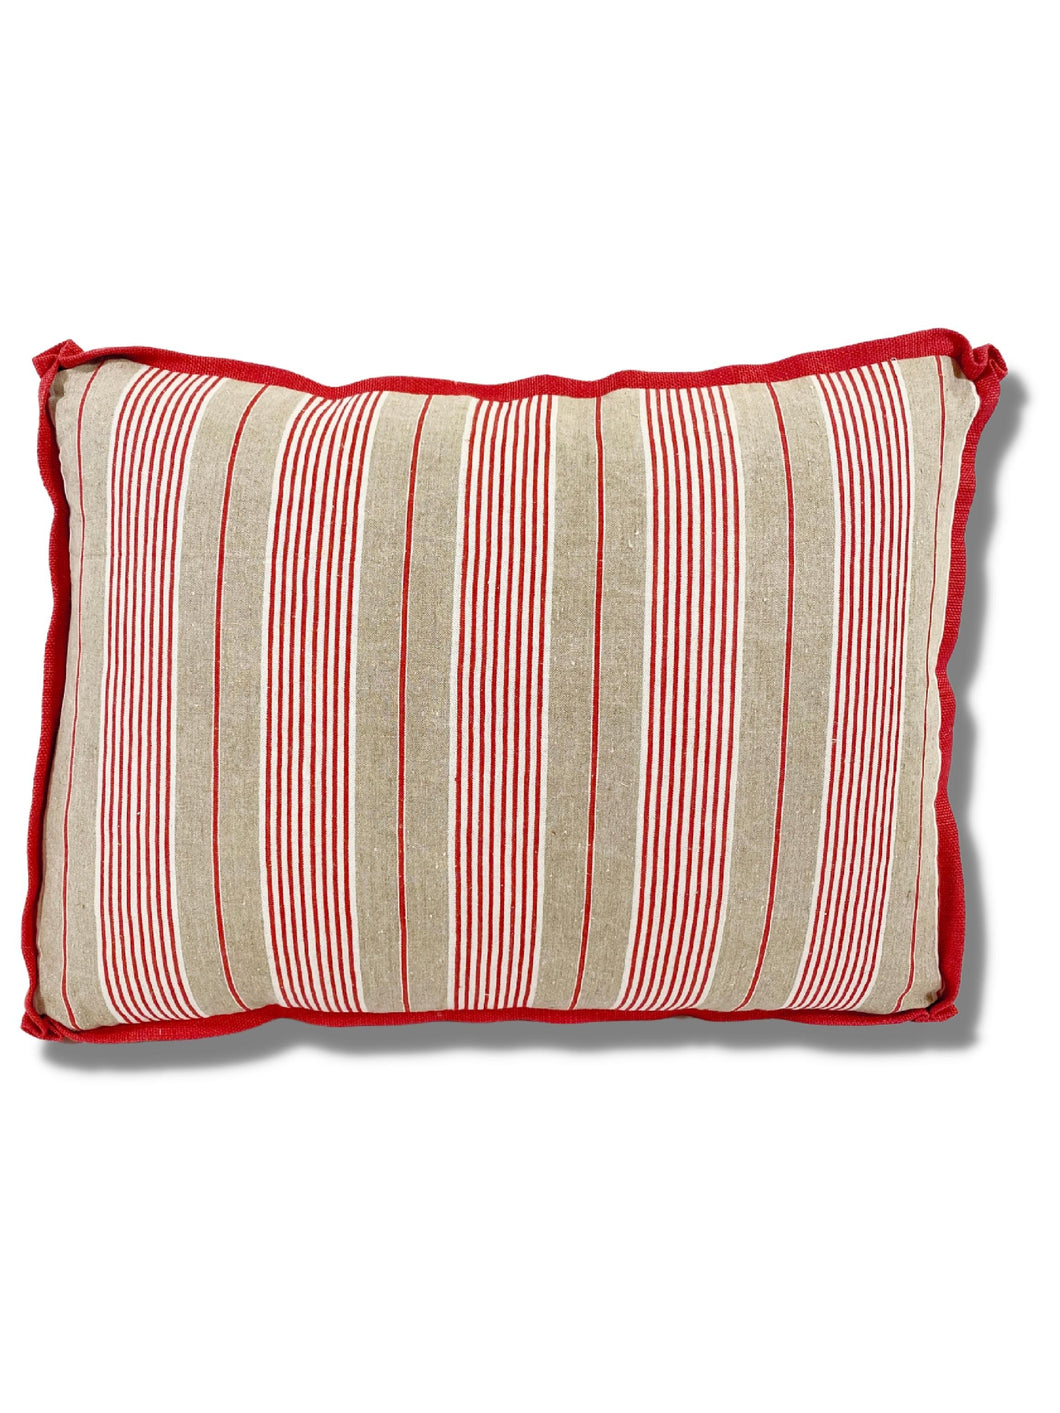 Antique French Ticking Boxed Pillows (Pair)